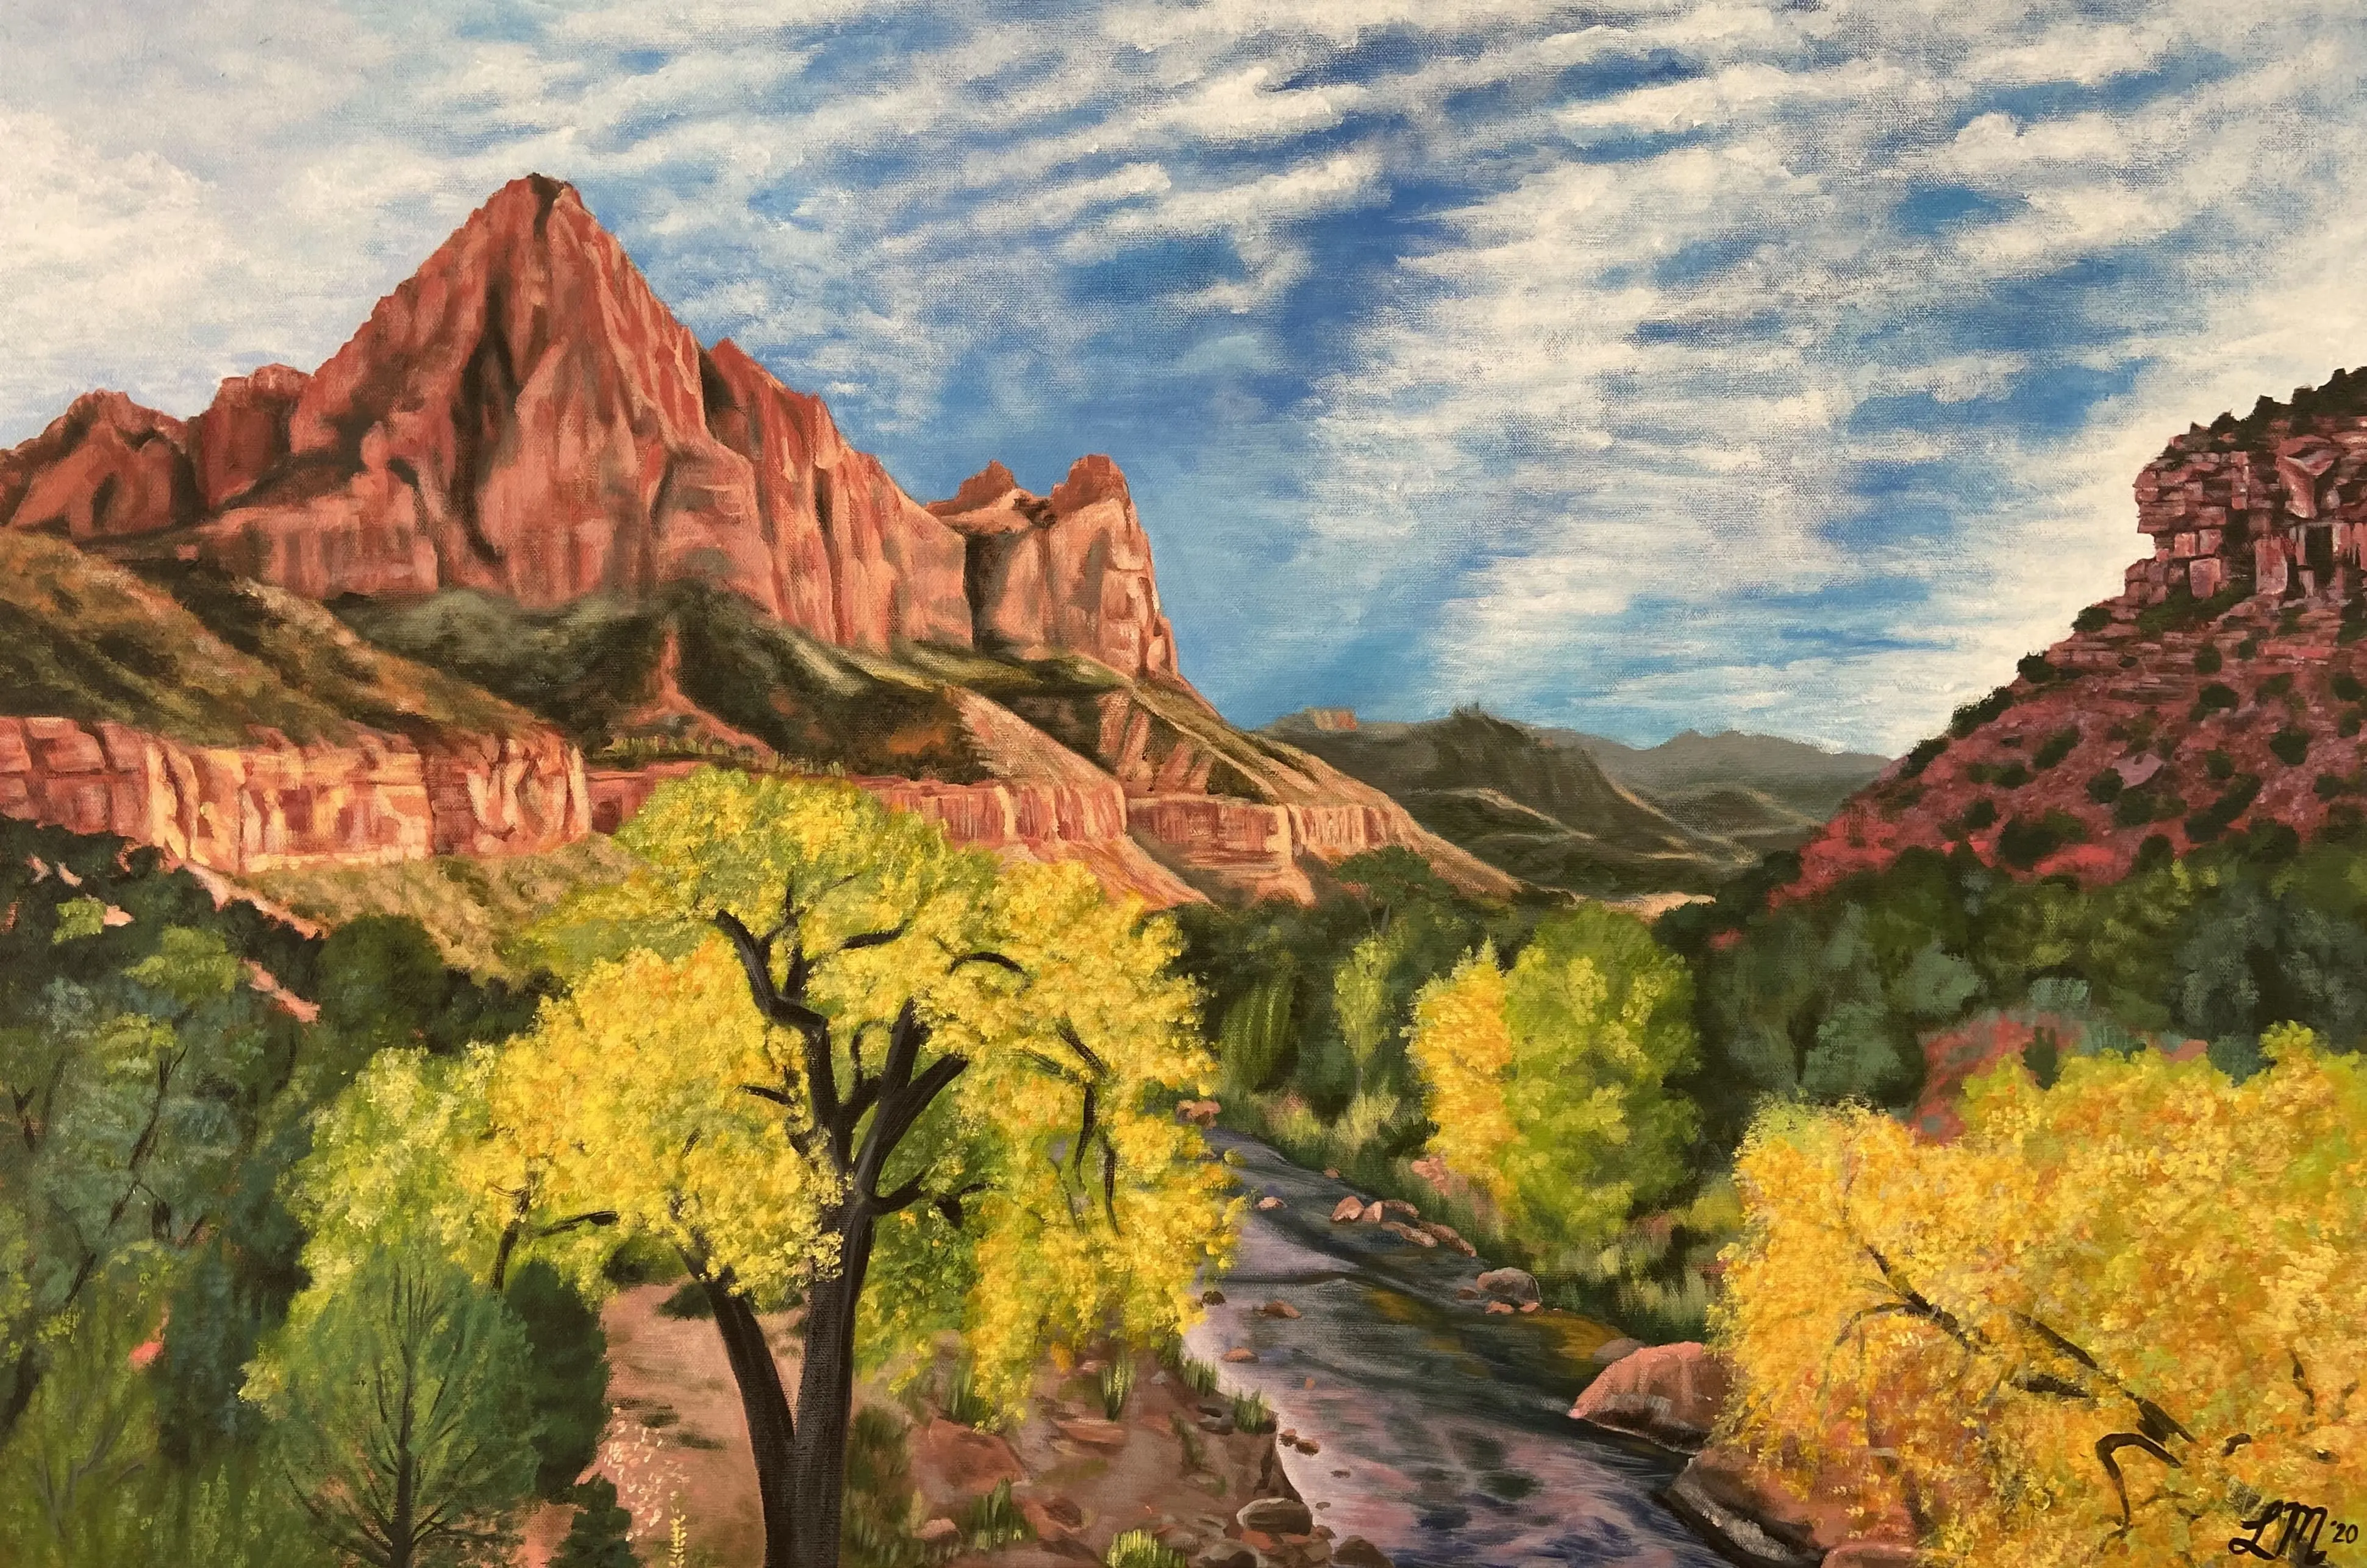 Acrylic painting of Zion